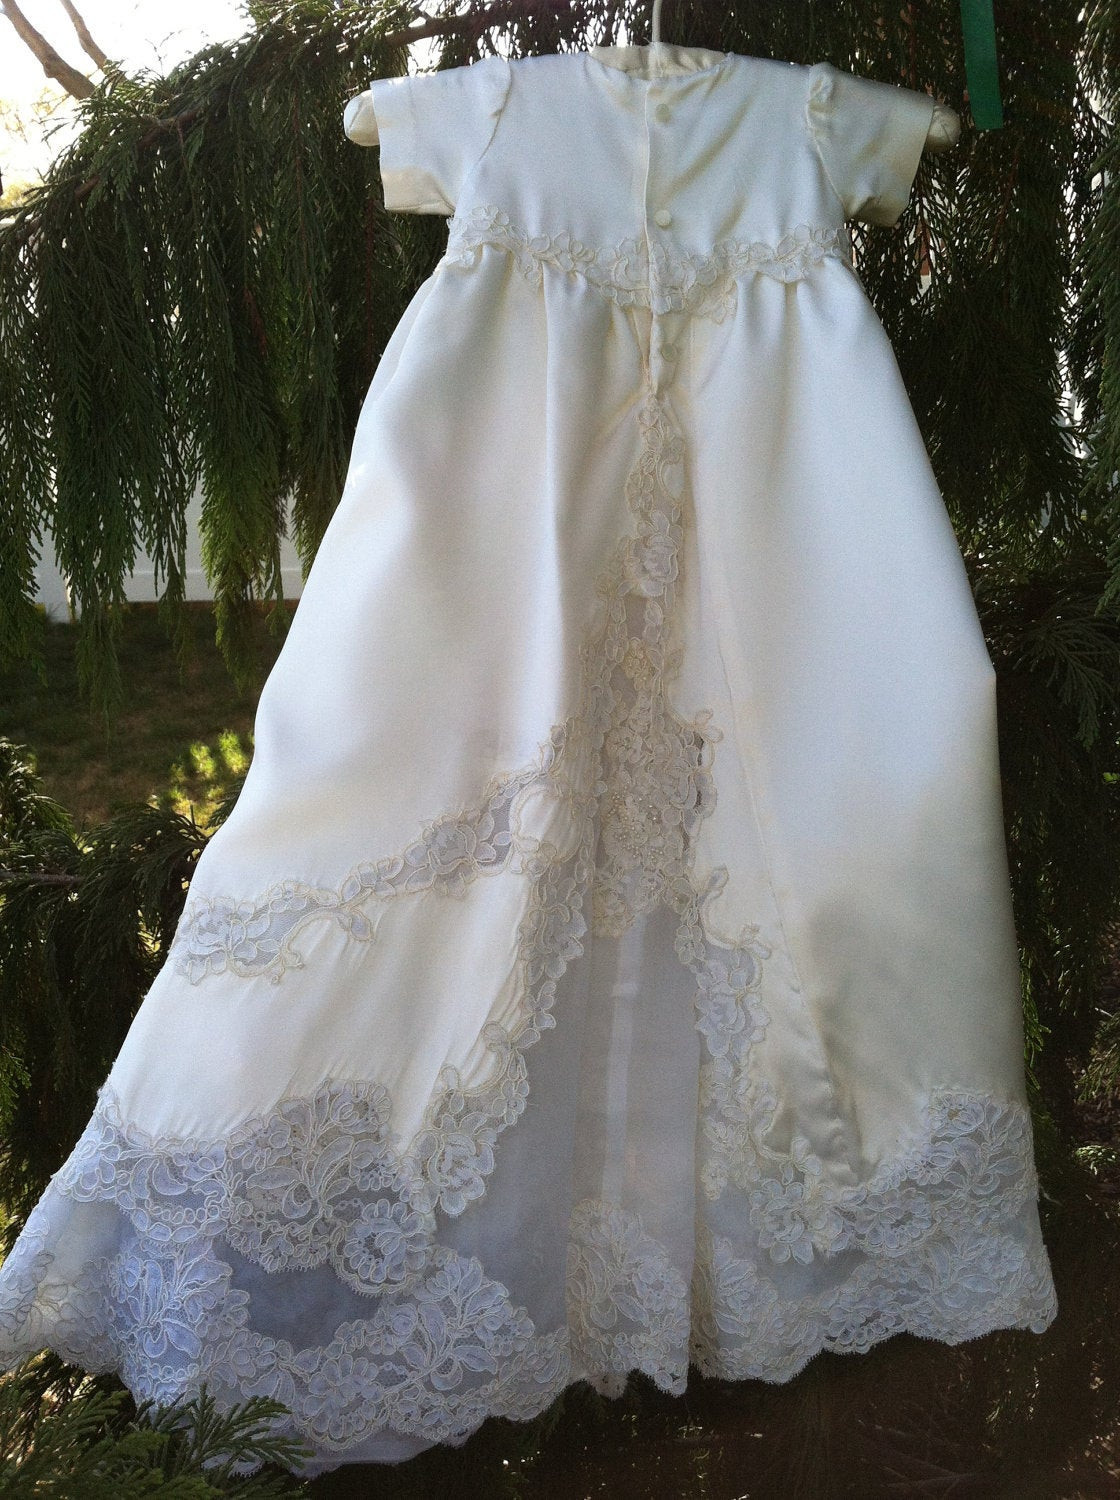 Christening Gown From Wedding Dress
 Christening Dress made from a Wedding Gown by SewMyDream